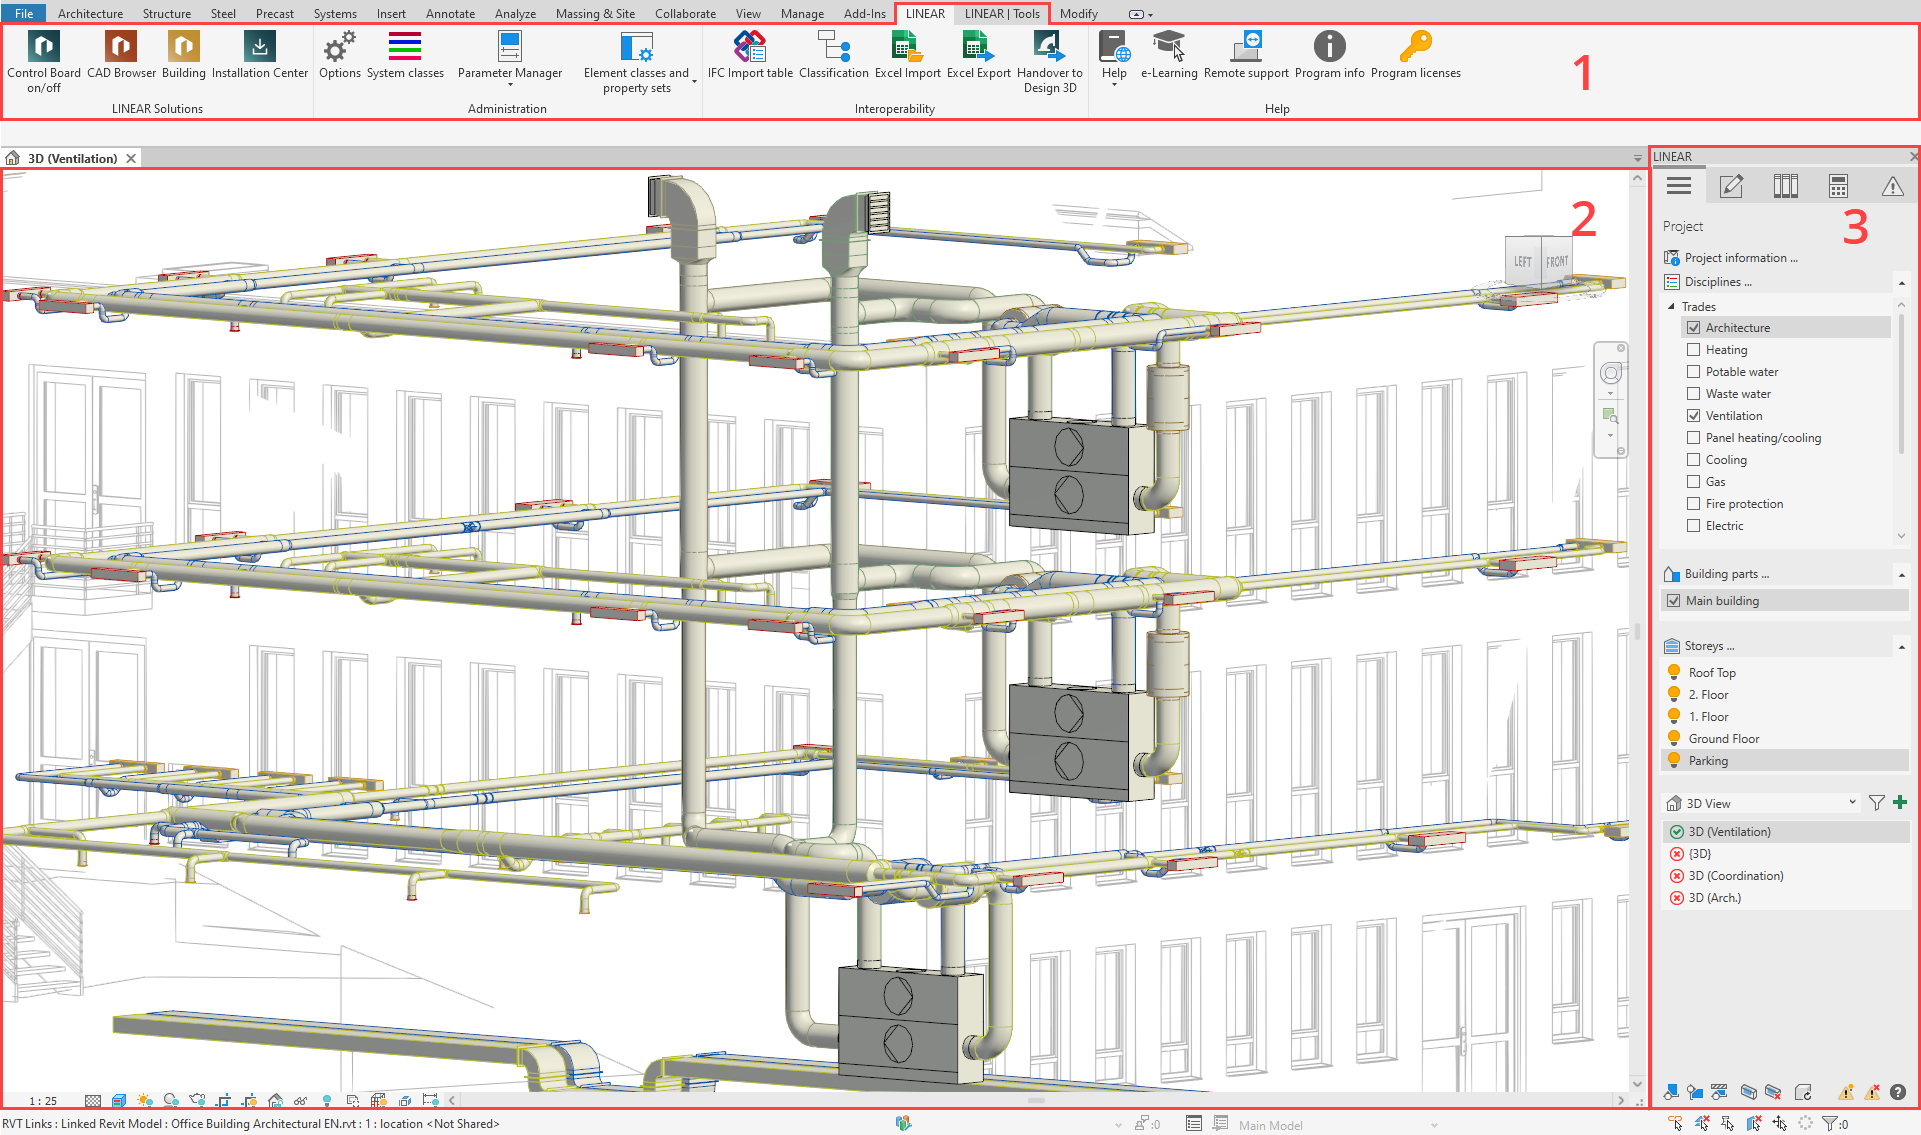 User interface of LINEAR Solutions in Autodesk Revit